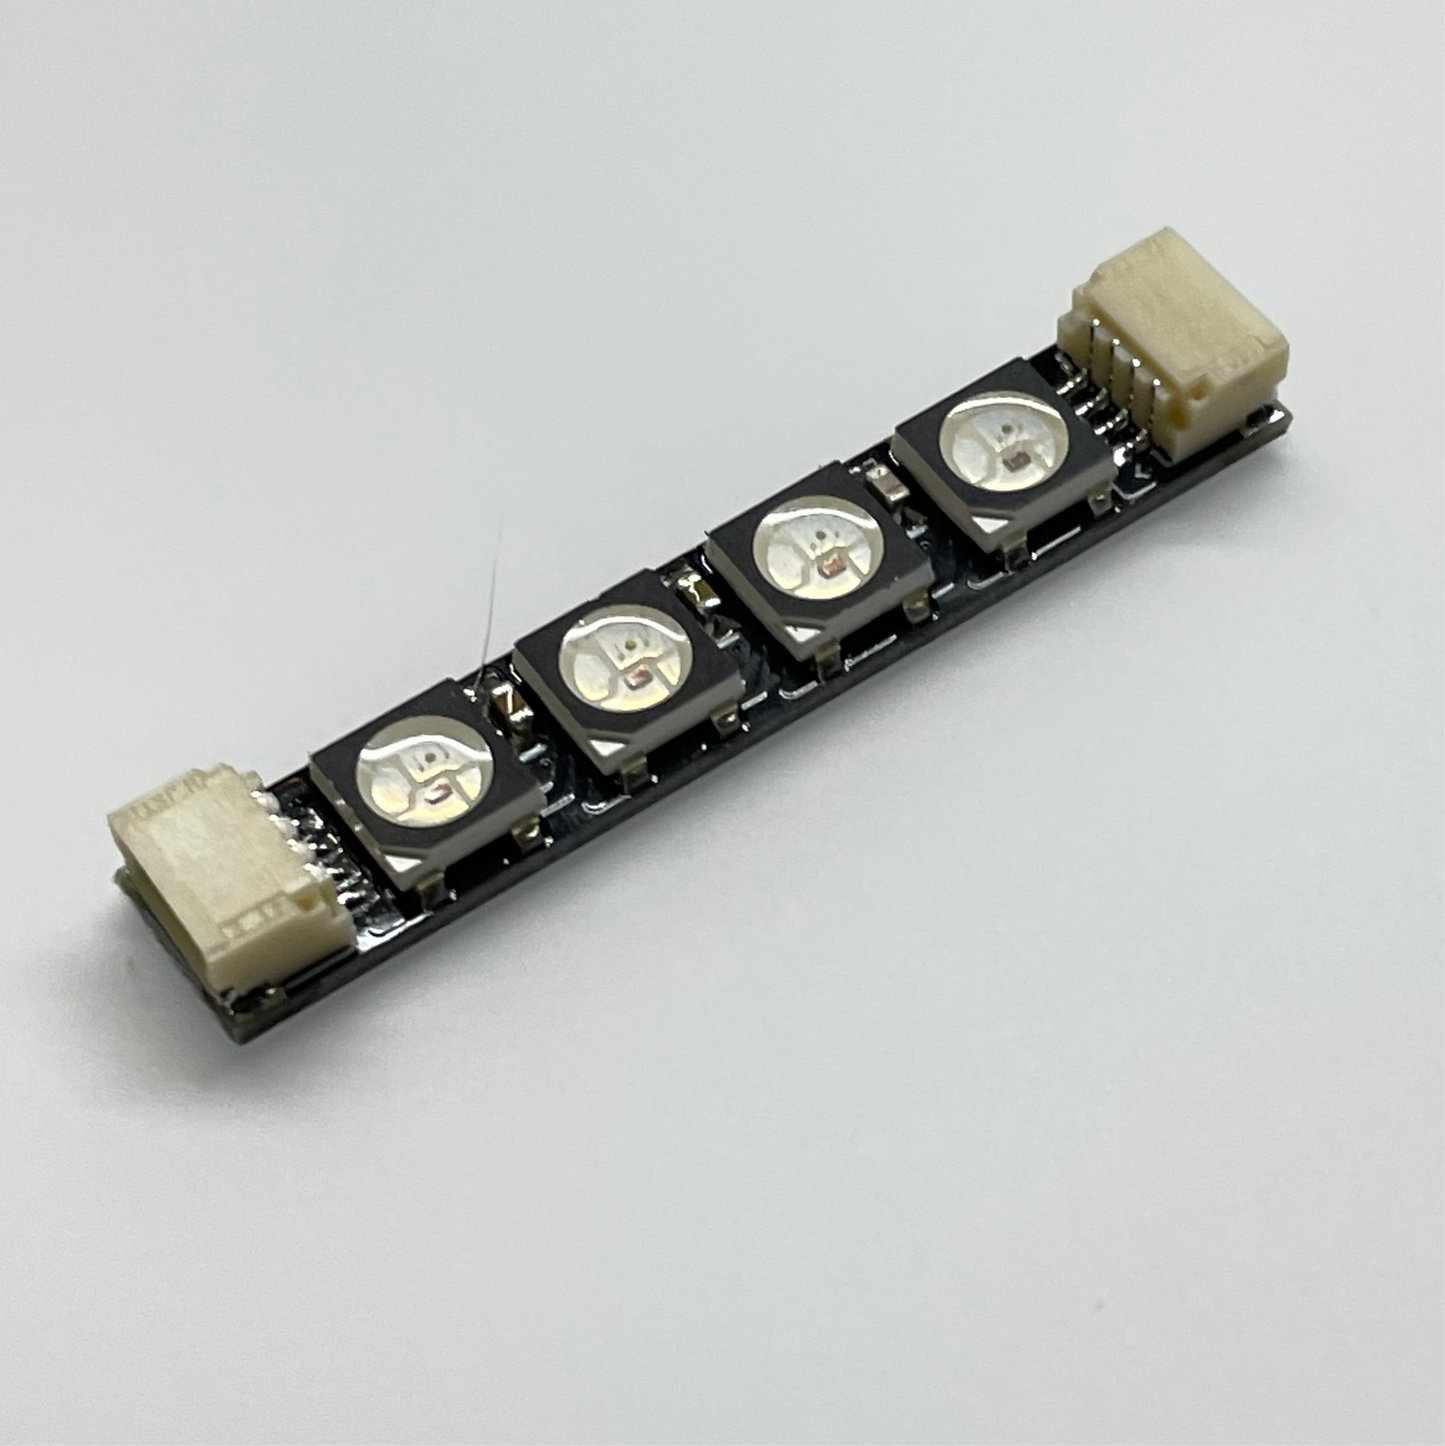 Infini Rainbow LED Middle Board (4-wire)